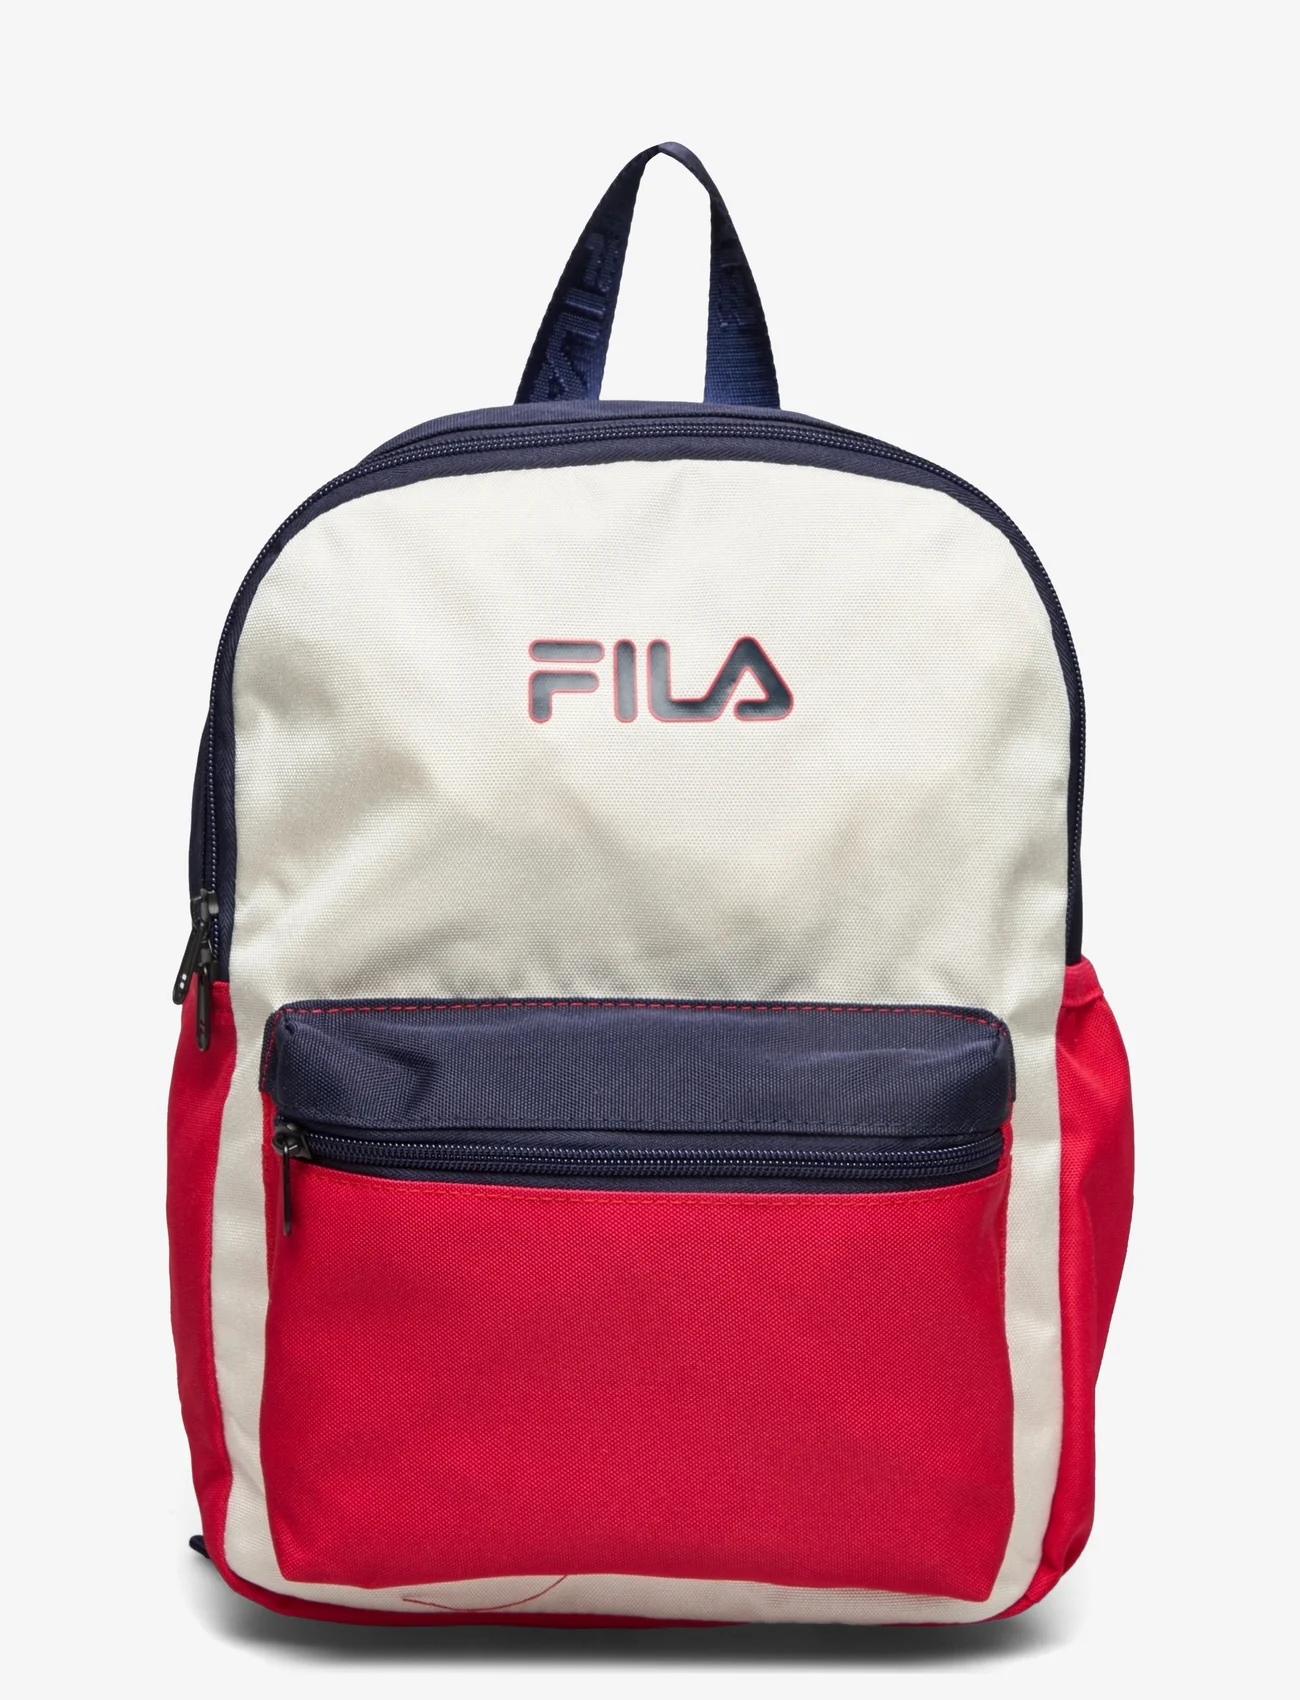 FILA - BURY Small easy backpack - sommerschnäppchen - medieval blue-antique white-true red - 0